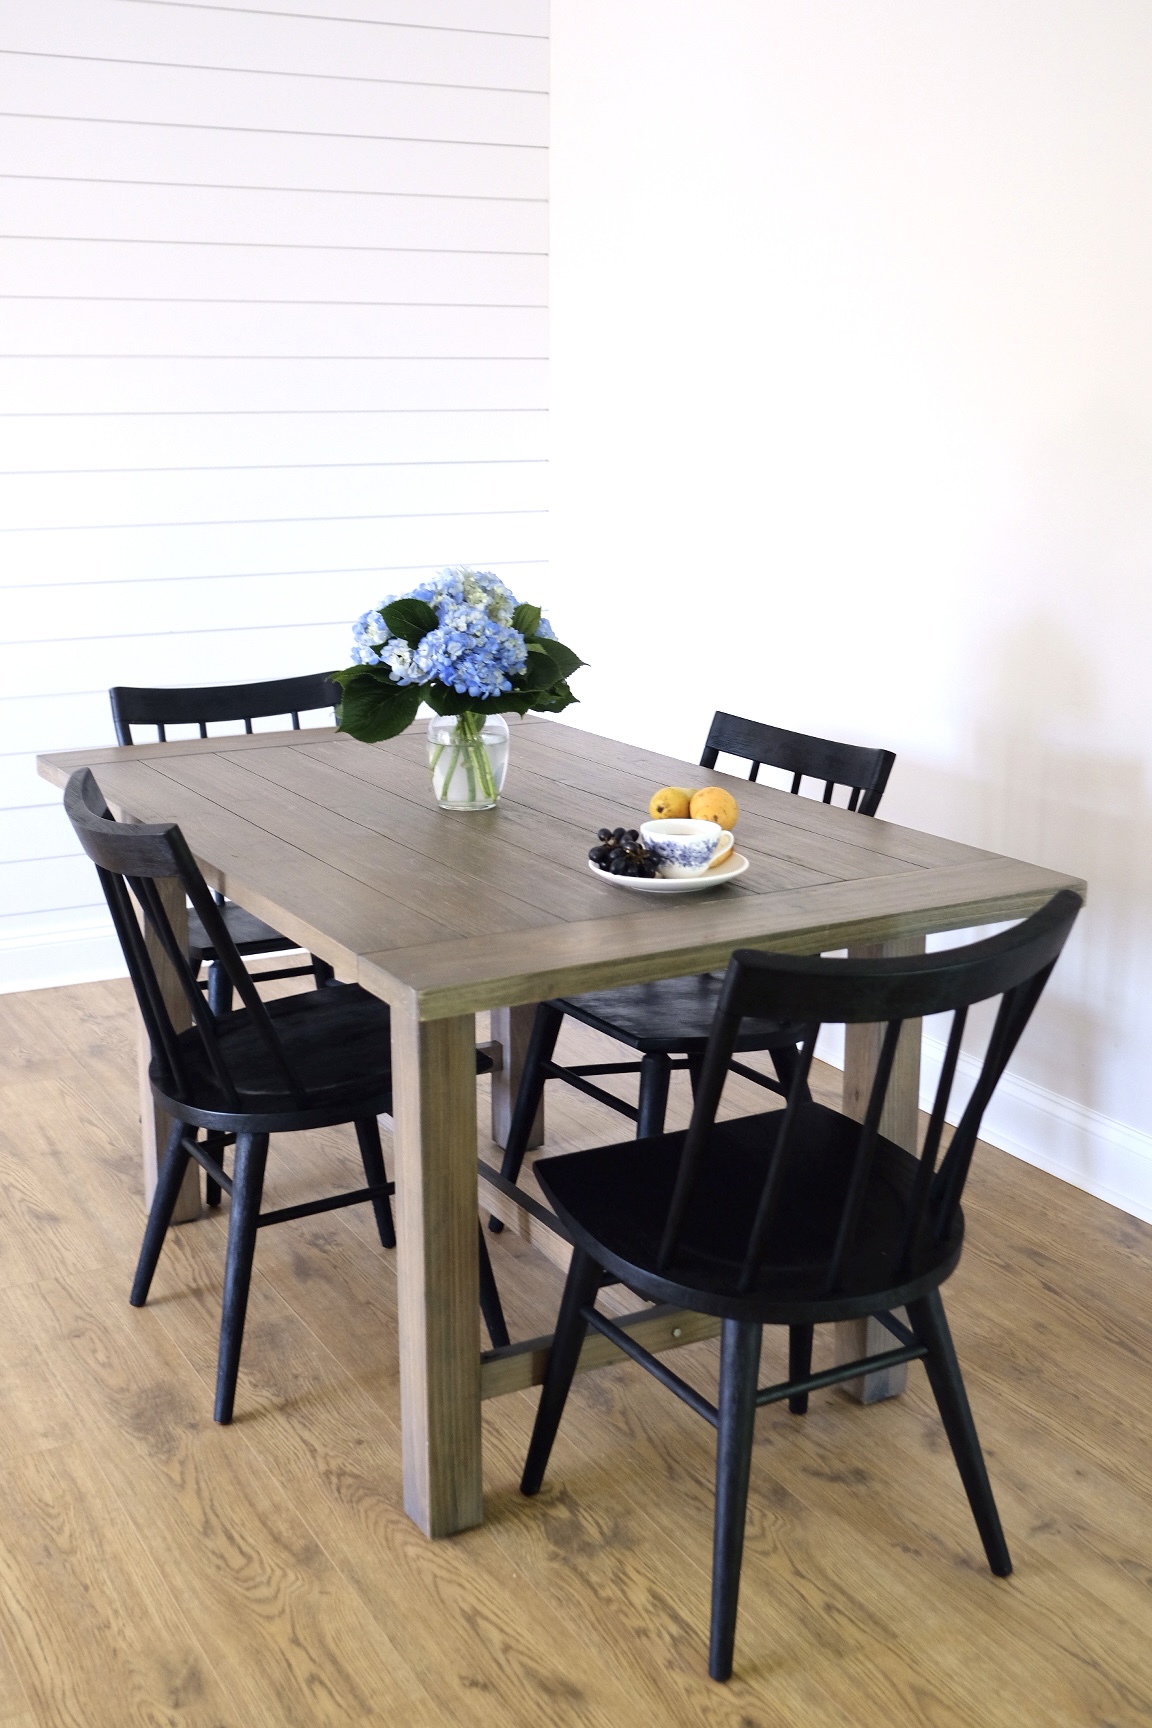 Lifestyle Blogger Chocolate and Lace shares her farmhouse style dining table and chairs